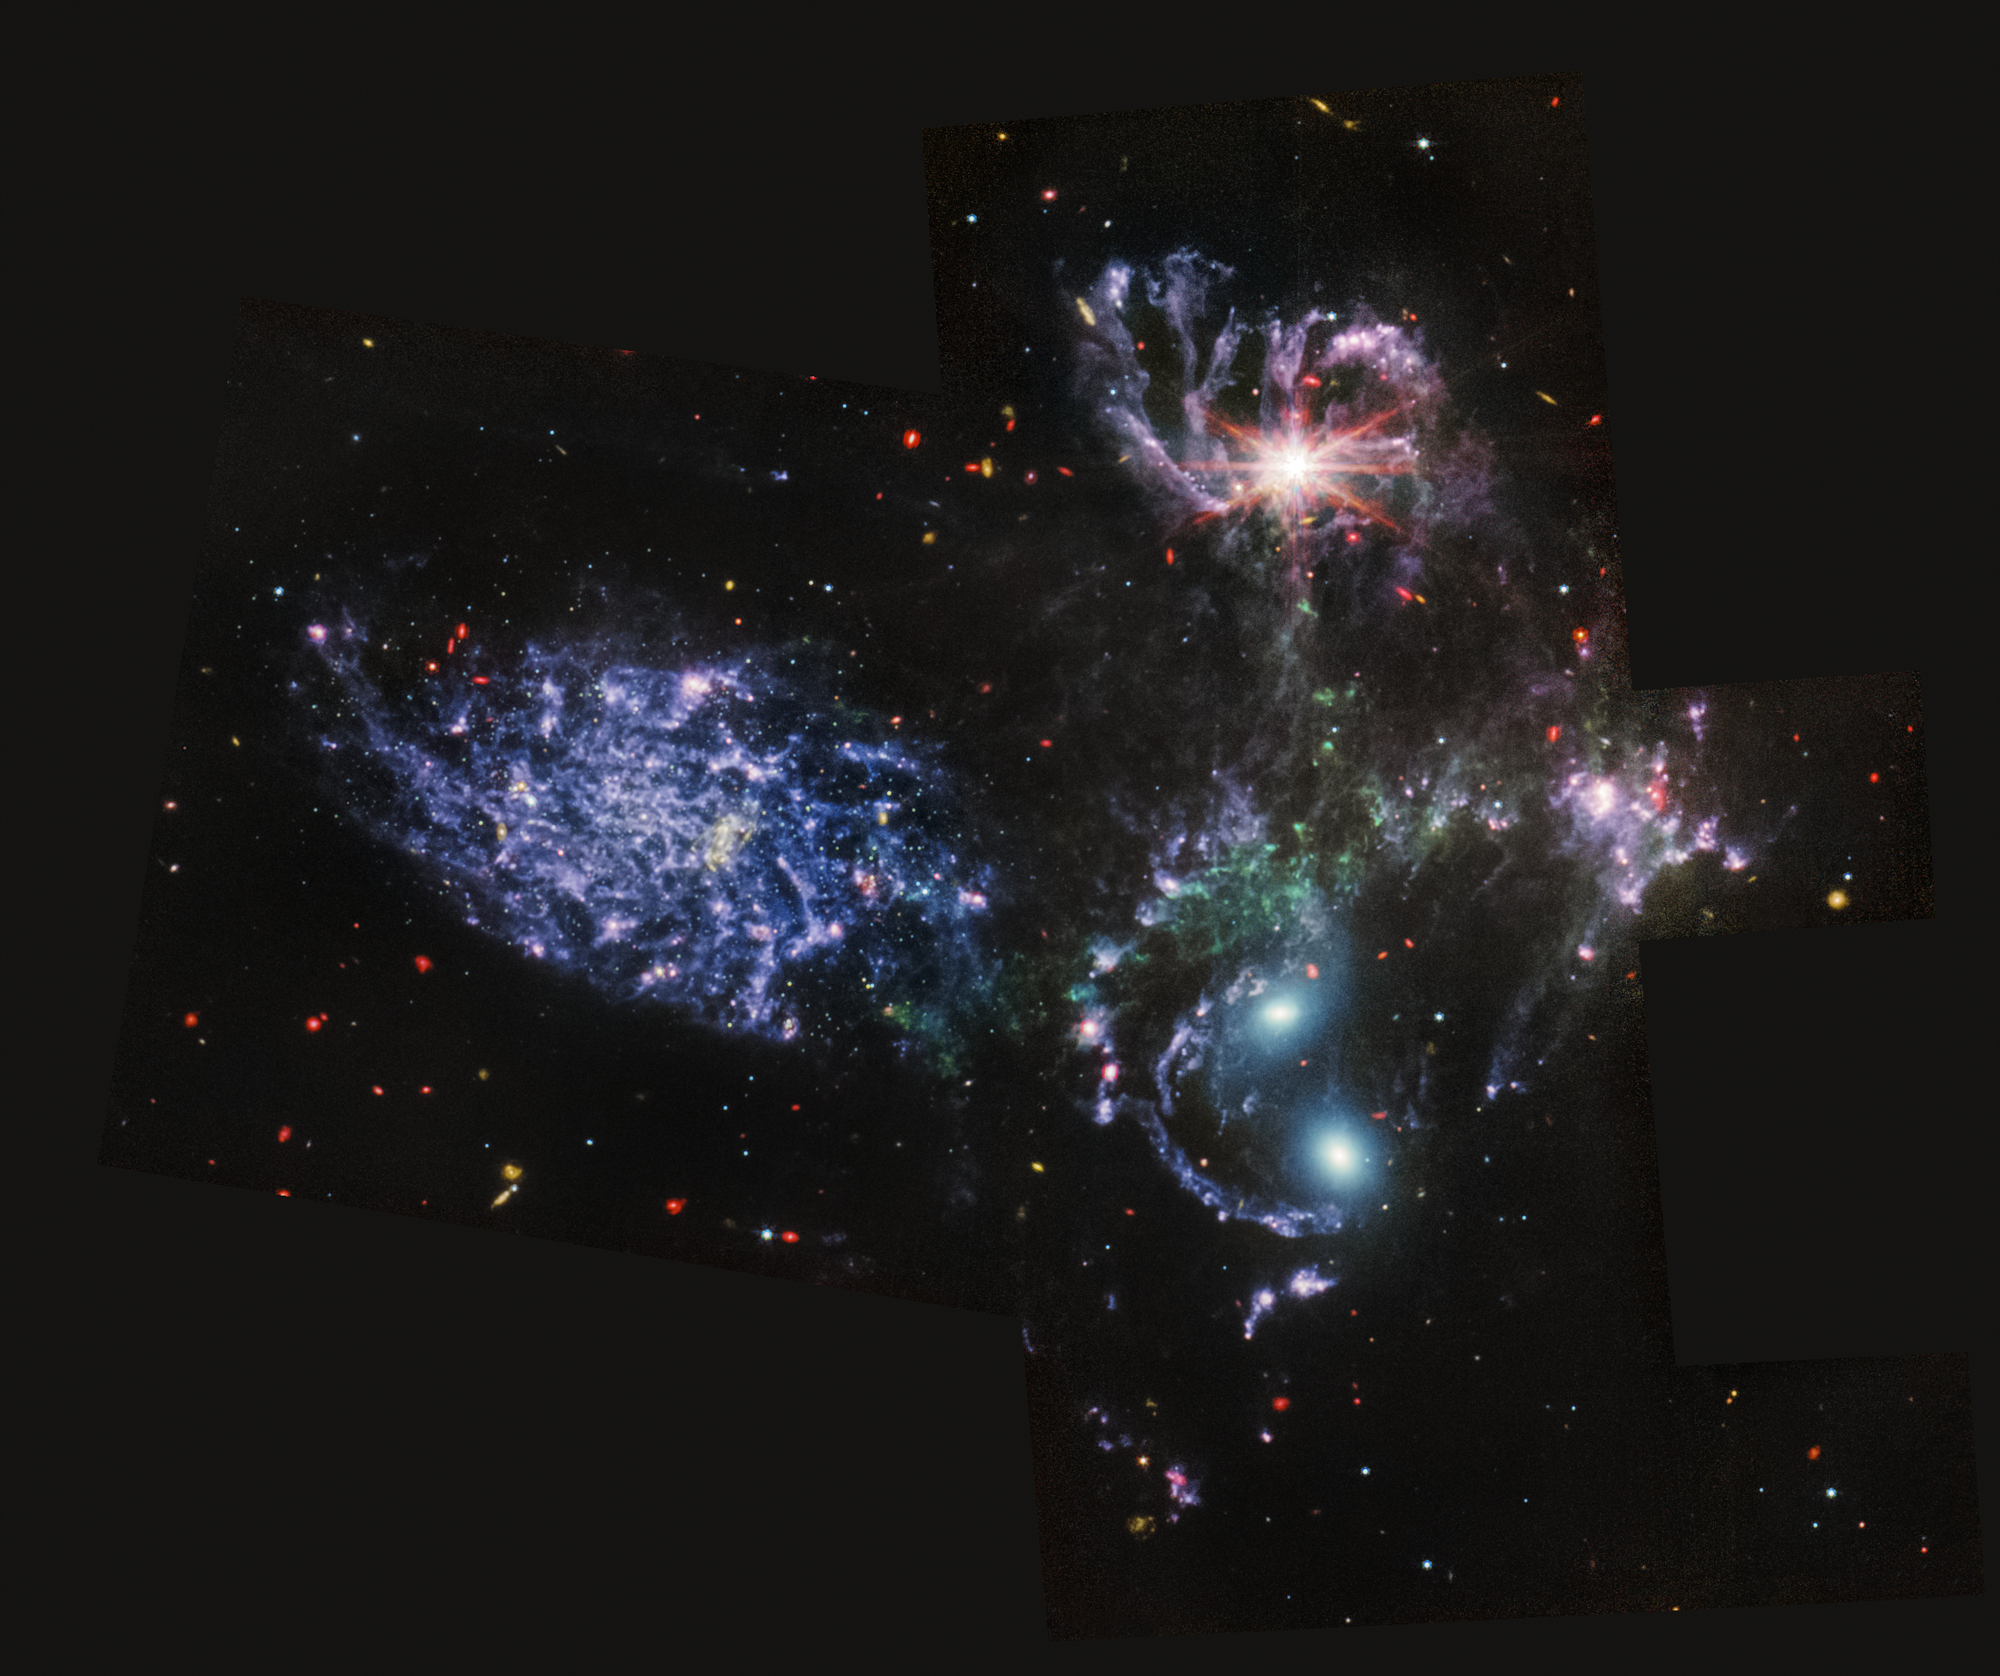 MIRI image of Stephan's Quintet, a grouping of five 
                        galaxies located in the constellation Pegasus. In this image, the red represents dusty, 
                        star-forming regions, as well as extremely distant, early galaxies and galaxies enshrouded in 
                        thick dust. Blue point sources show stars or star clusters without dust. 
                        Diffuse areas of blue indicate dust that has a significant amount of large 
                        hydrocarbon molecules. For small background galaxies scattered throughout the image,
                         the green and yellow colors represent more distant, earlier galaxies that are rich 
                         in these hydrocarbons as well.